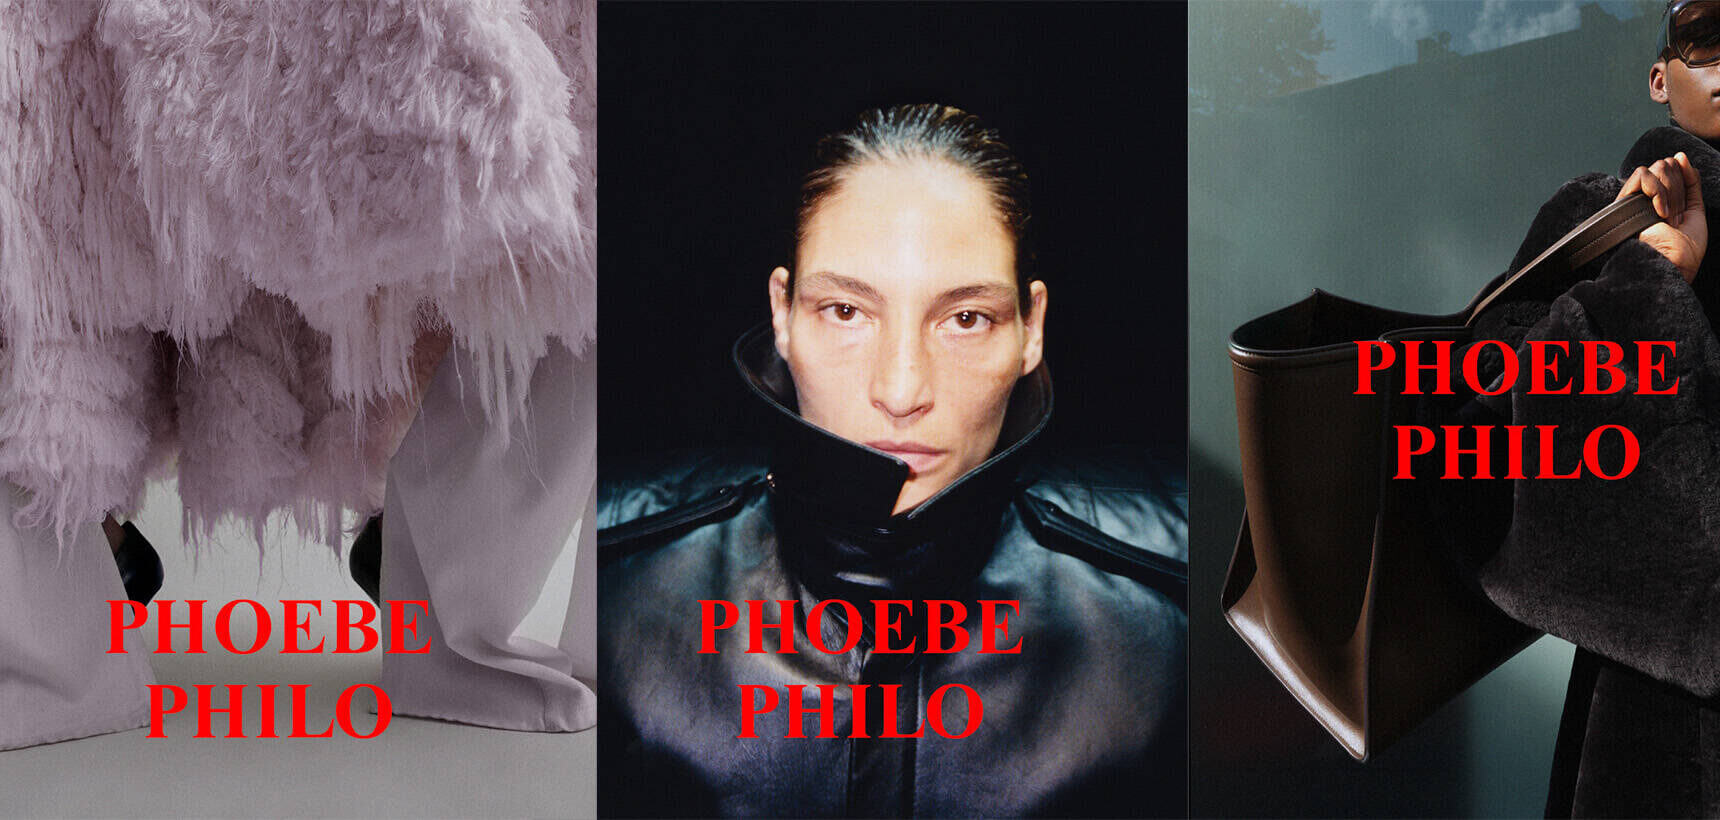 Business Reporter - Best of Business - Phoebe Philo's fashion